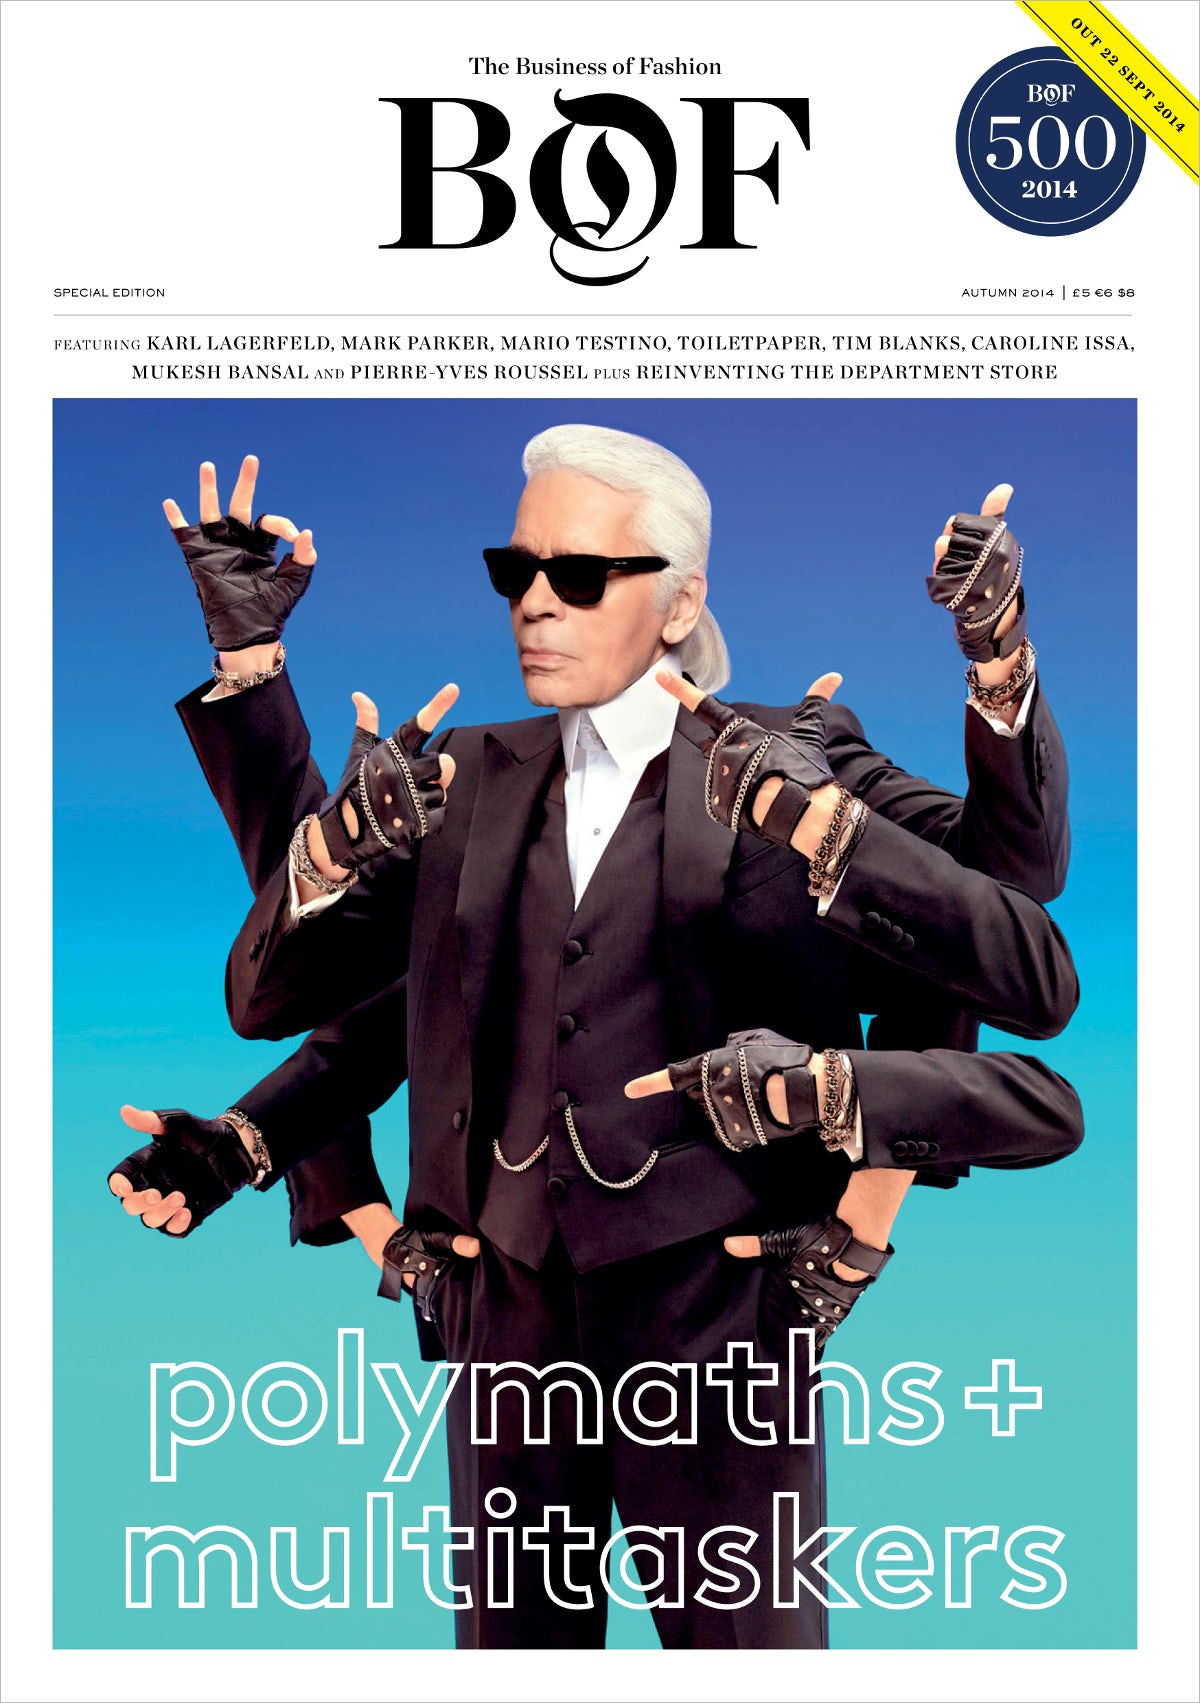 Louis Vuitton - Iconoclasts Frank Gehry, Karl Lagerfeld, Cindy Sherman,  Christian Louboutin and Marc Newson photographed by Patrick Demarchelier  for Celebrating Monogram